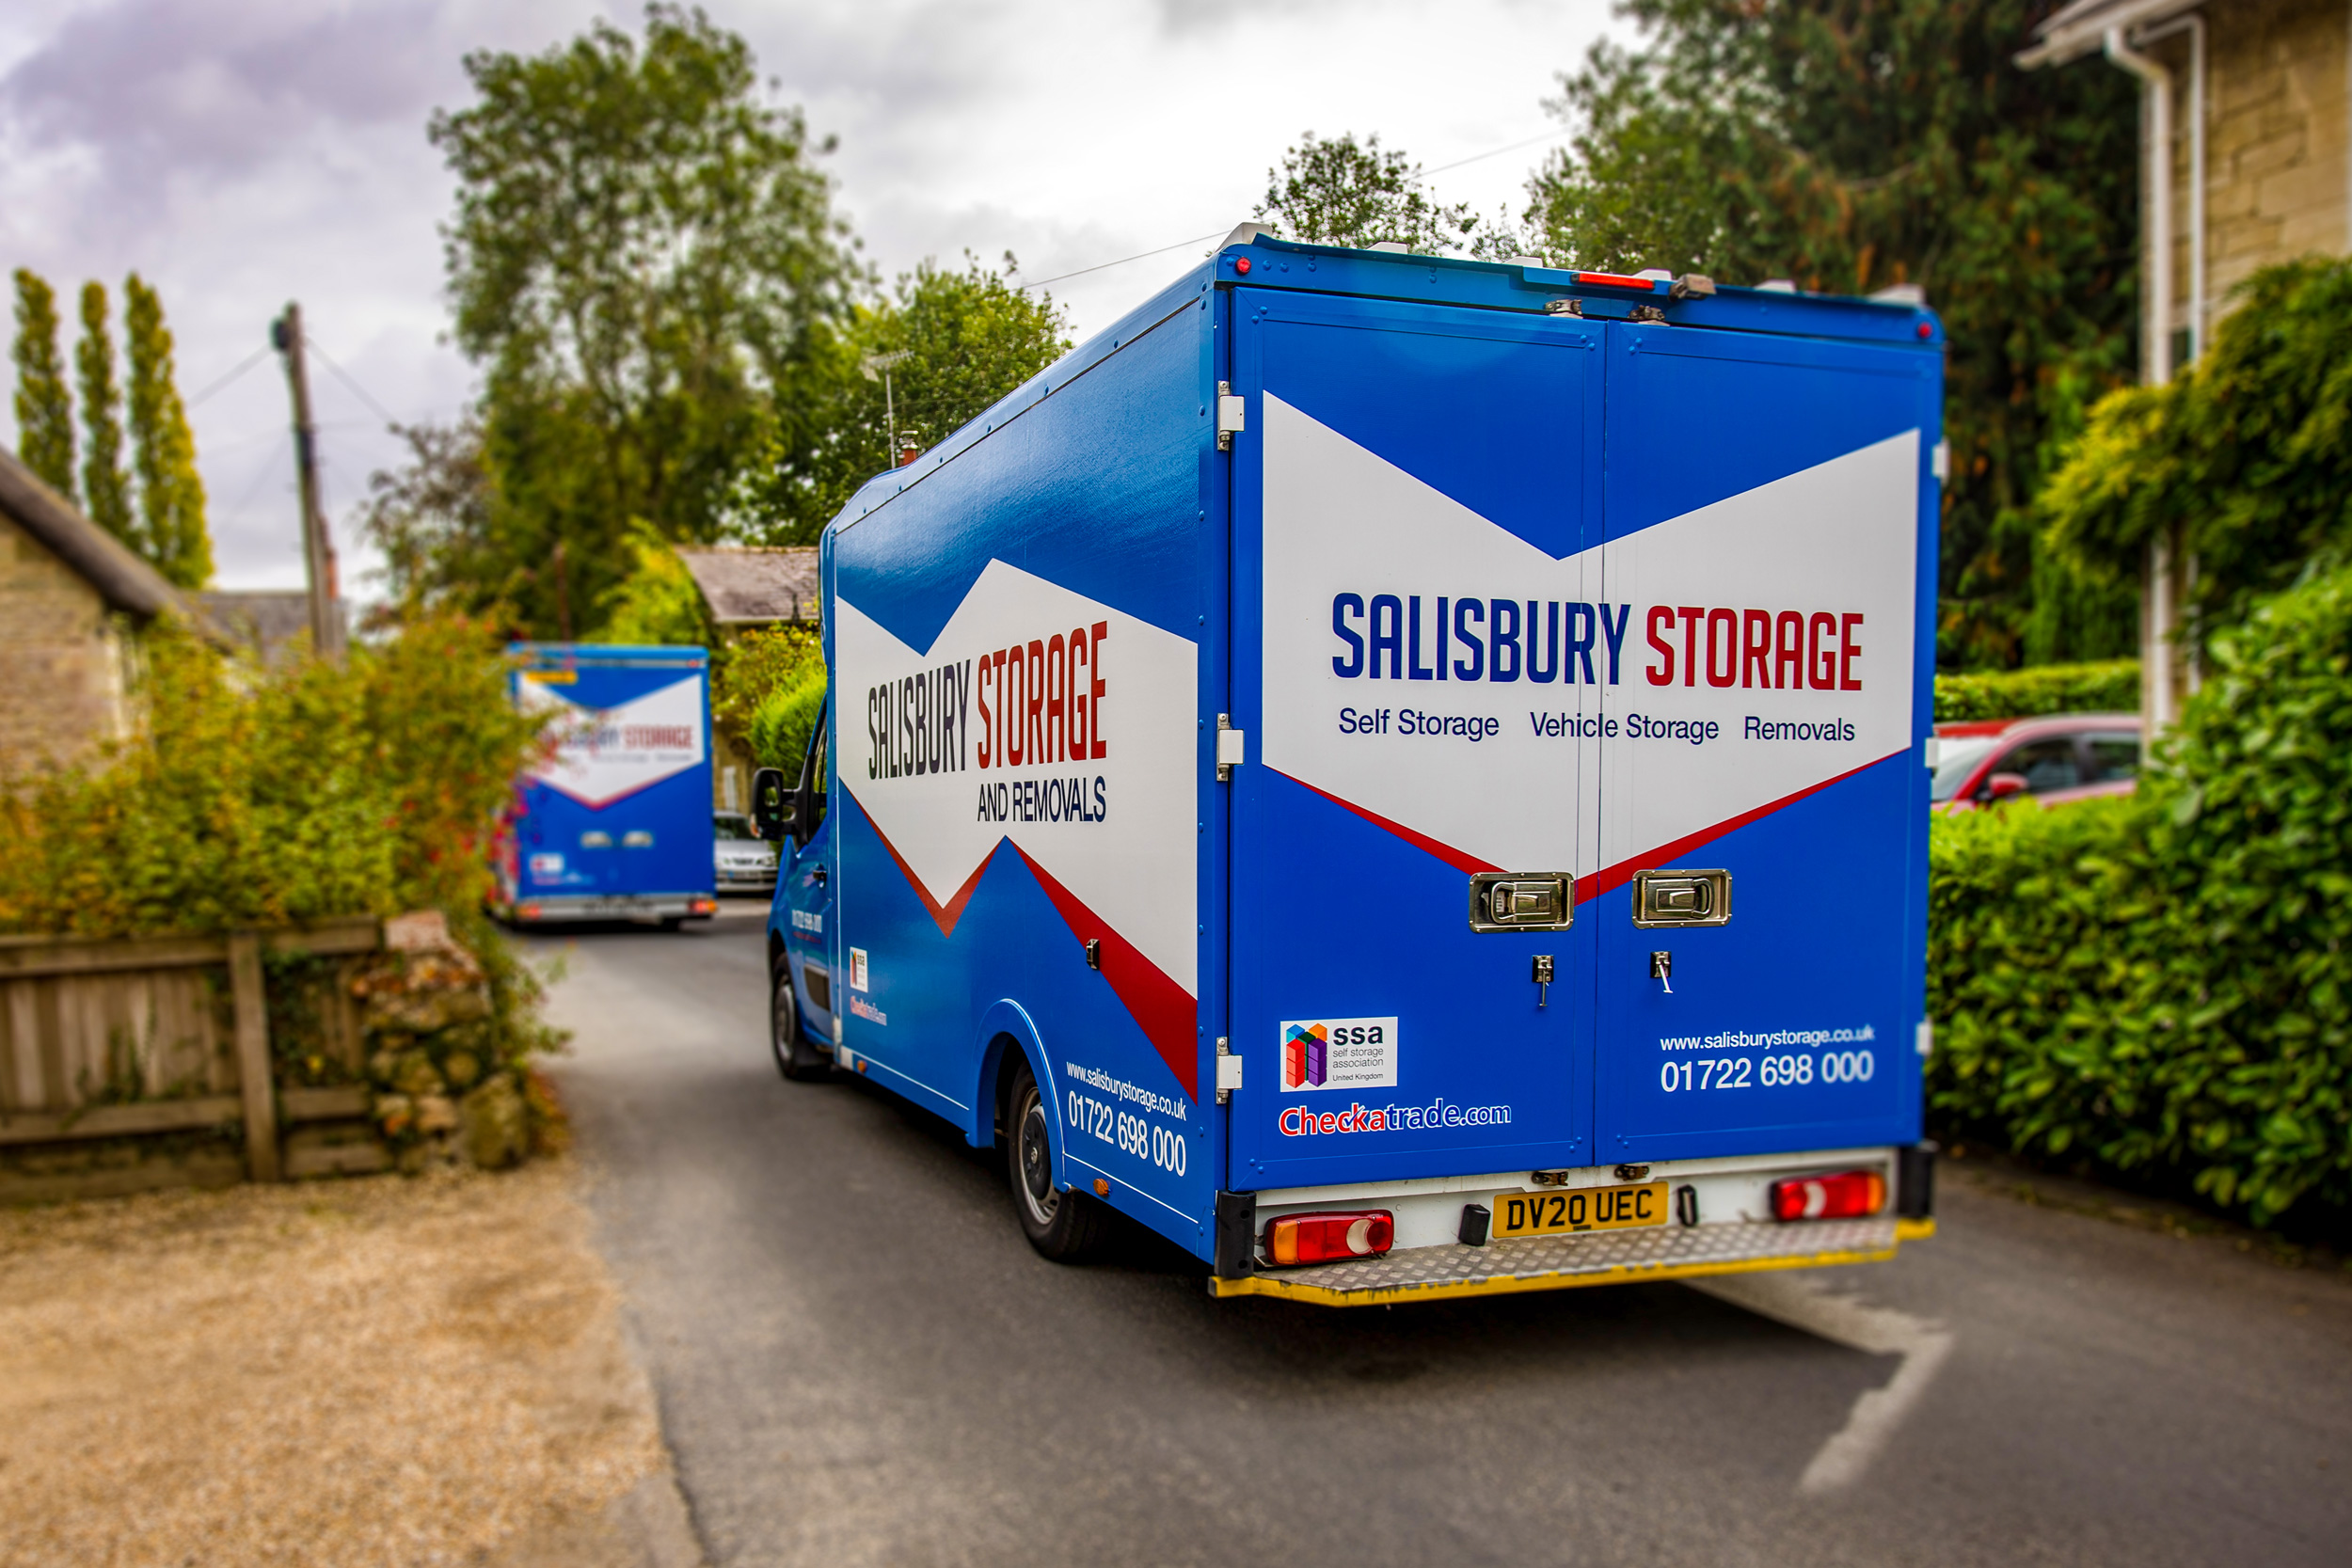 Two removals and storage vans driving down a scenic road on a journey transporting belongings.